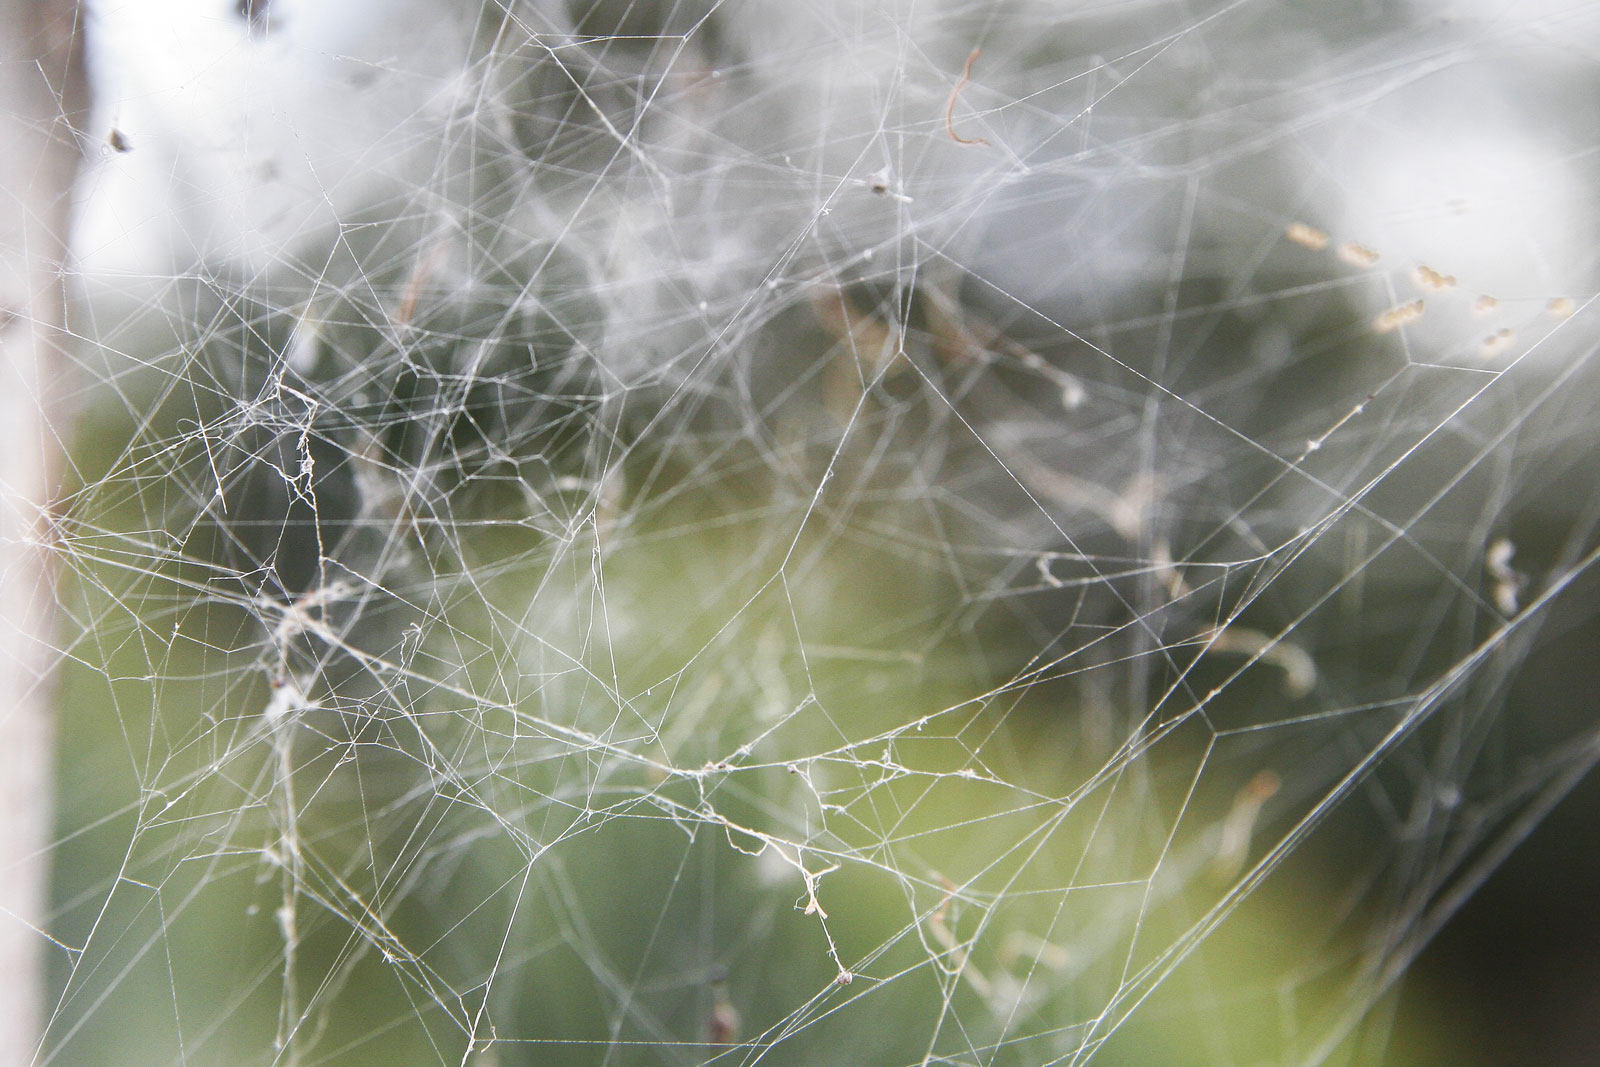 Tangled in a Web: Learn About Spiders